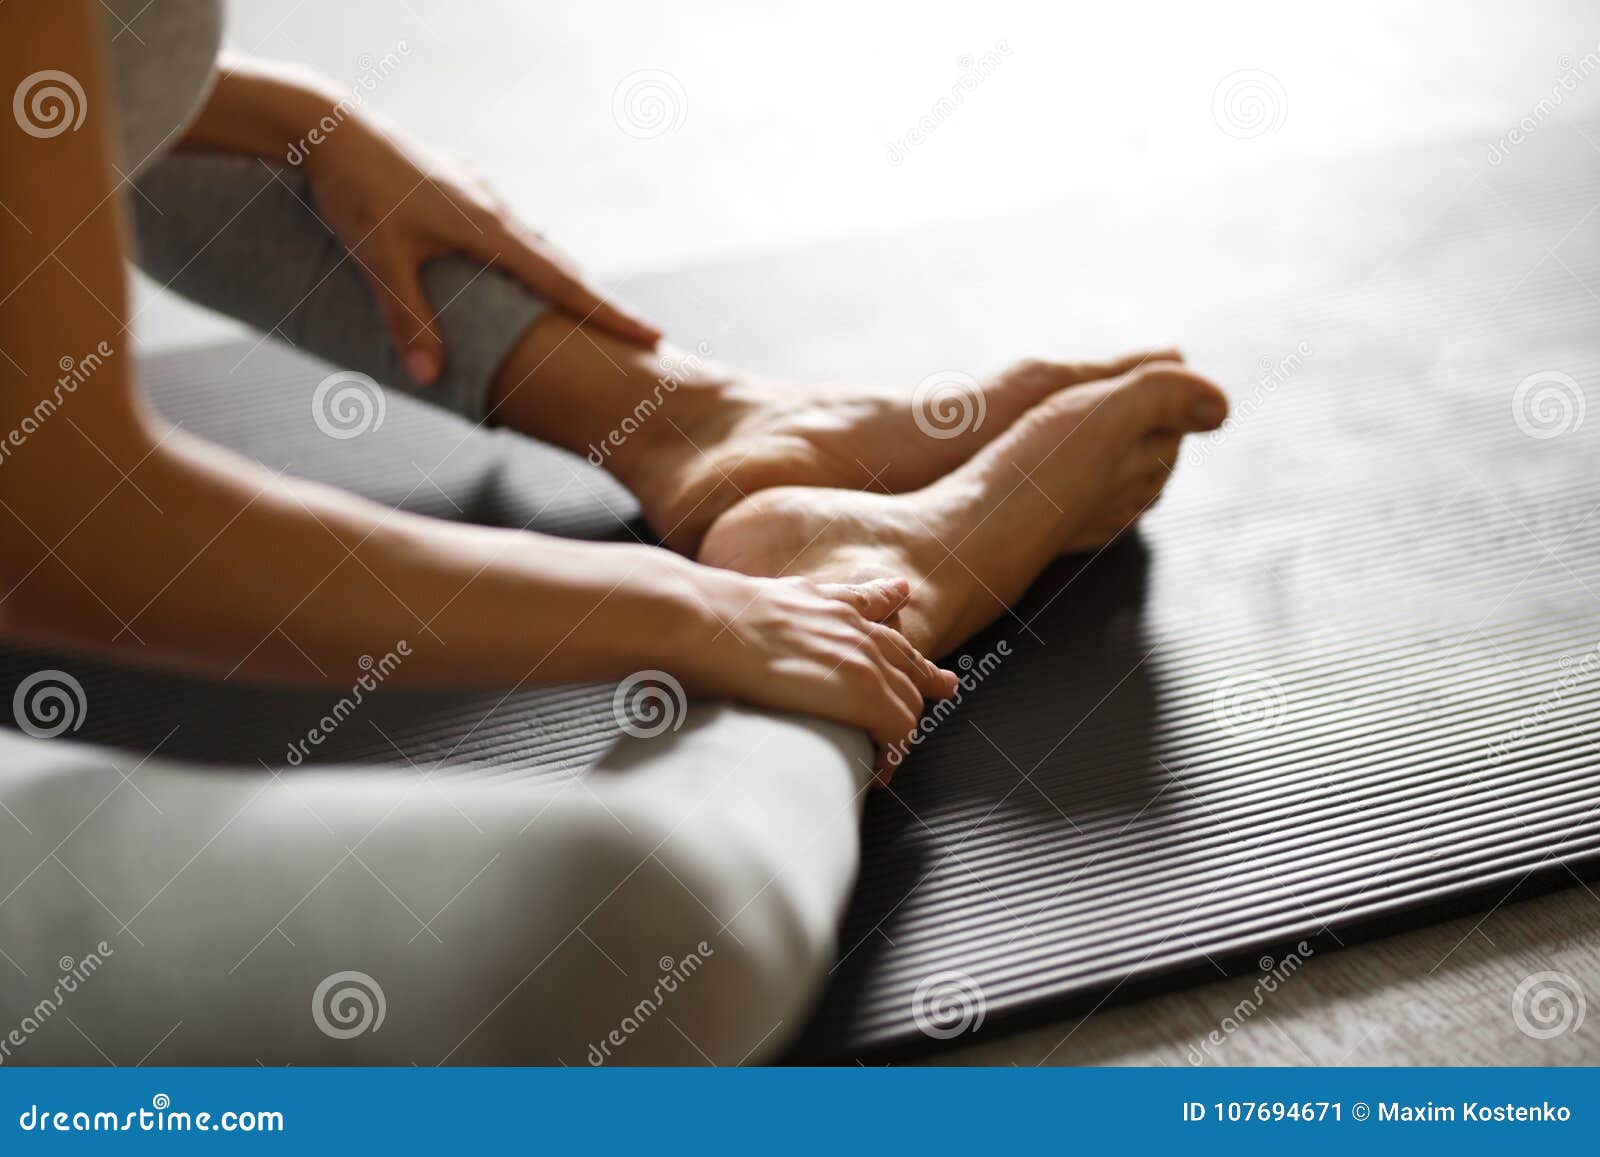 young sporty woman doing yoga stretching exercise sitting in gym near bright windows